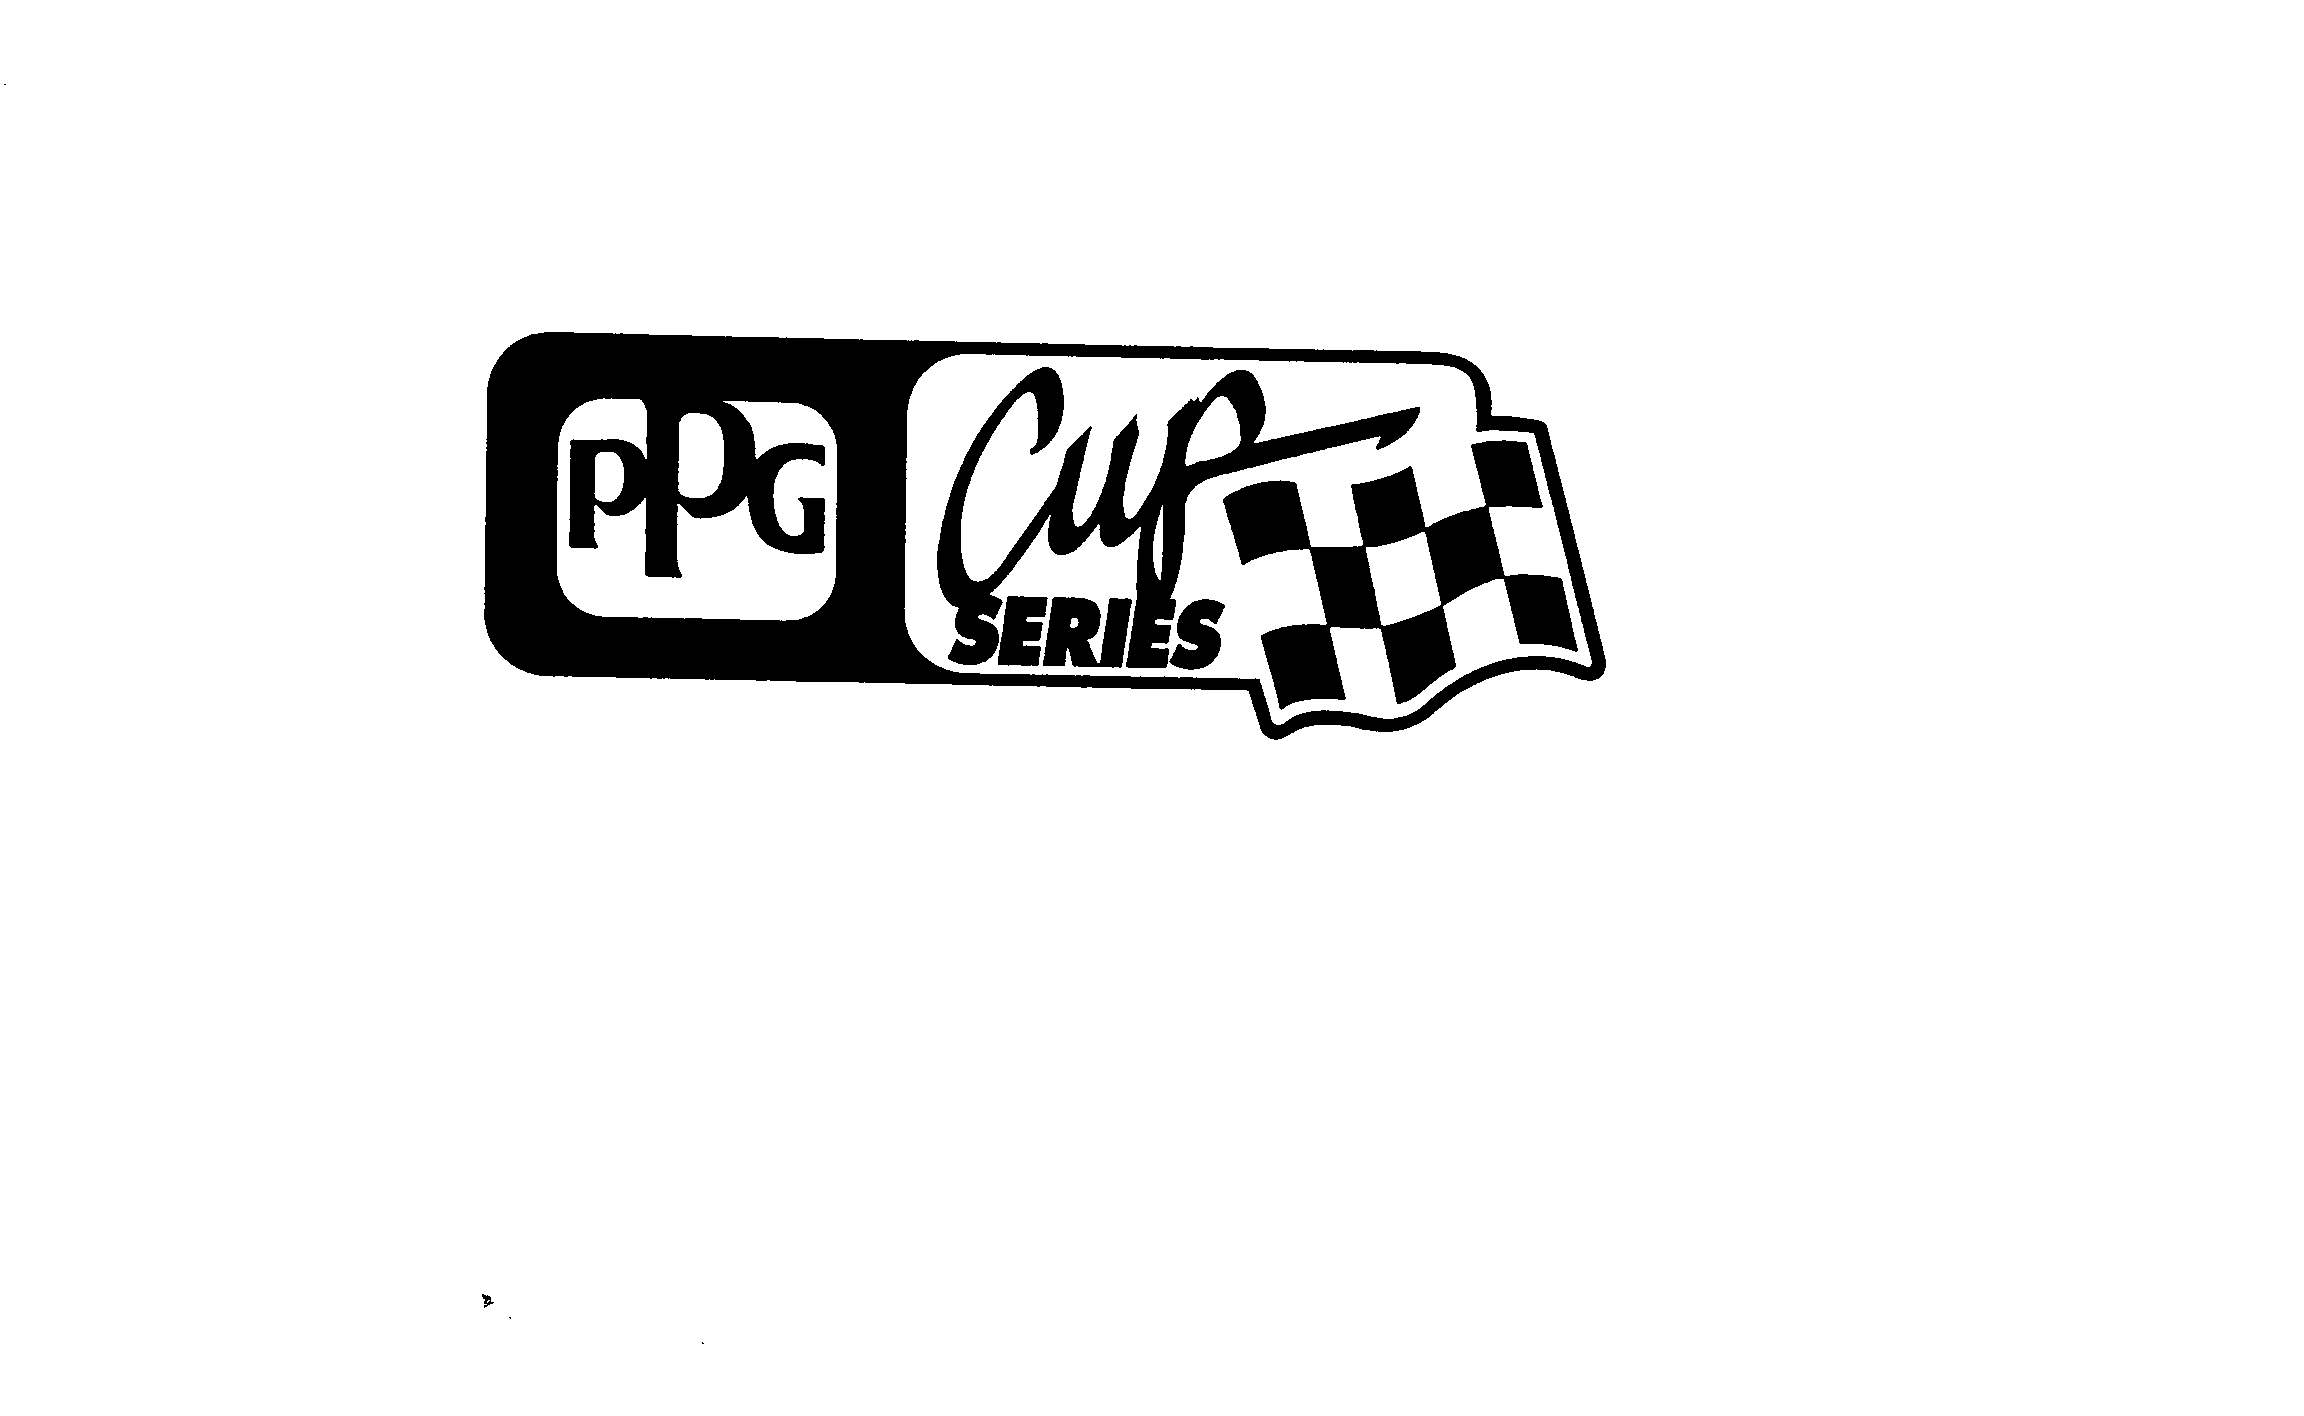  PPG CUP SERIES